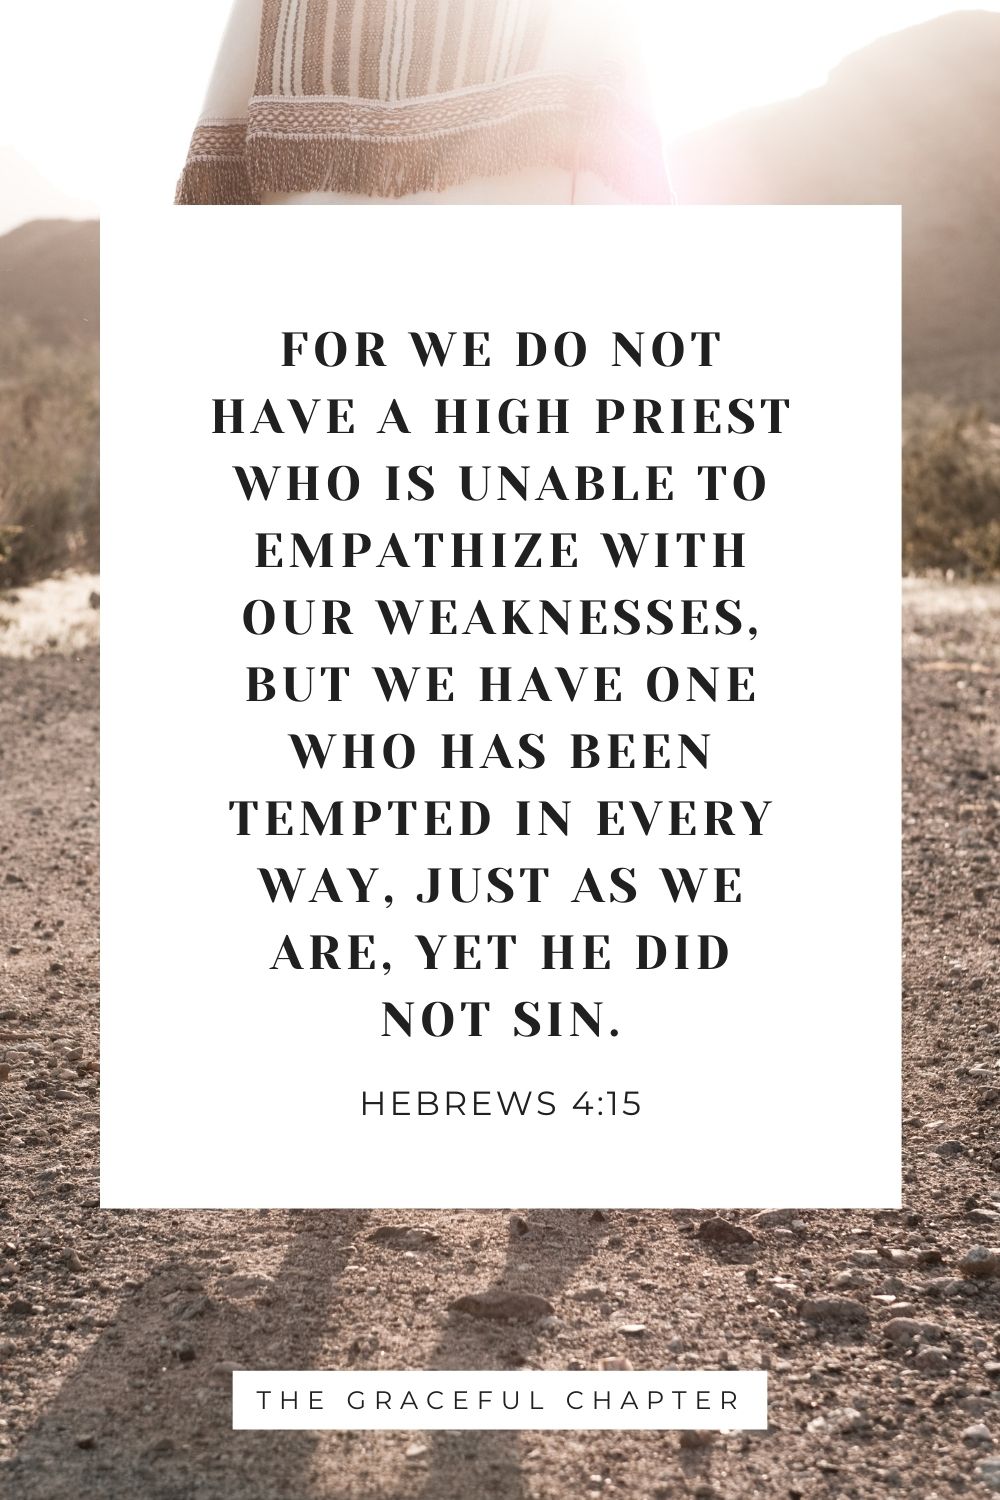 For we do not have a high priest who is unable to empathize with our weaknesses, but we have one who has been tempted in every way, just as we are, yet he did not sin. Hebrews 4:15